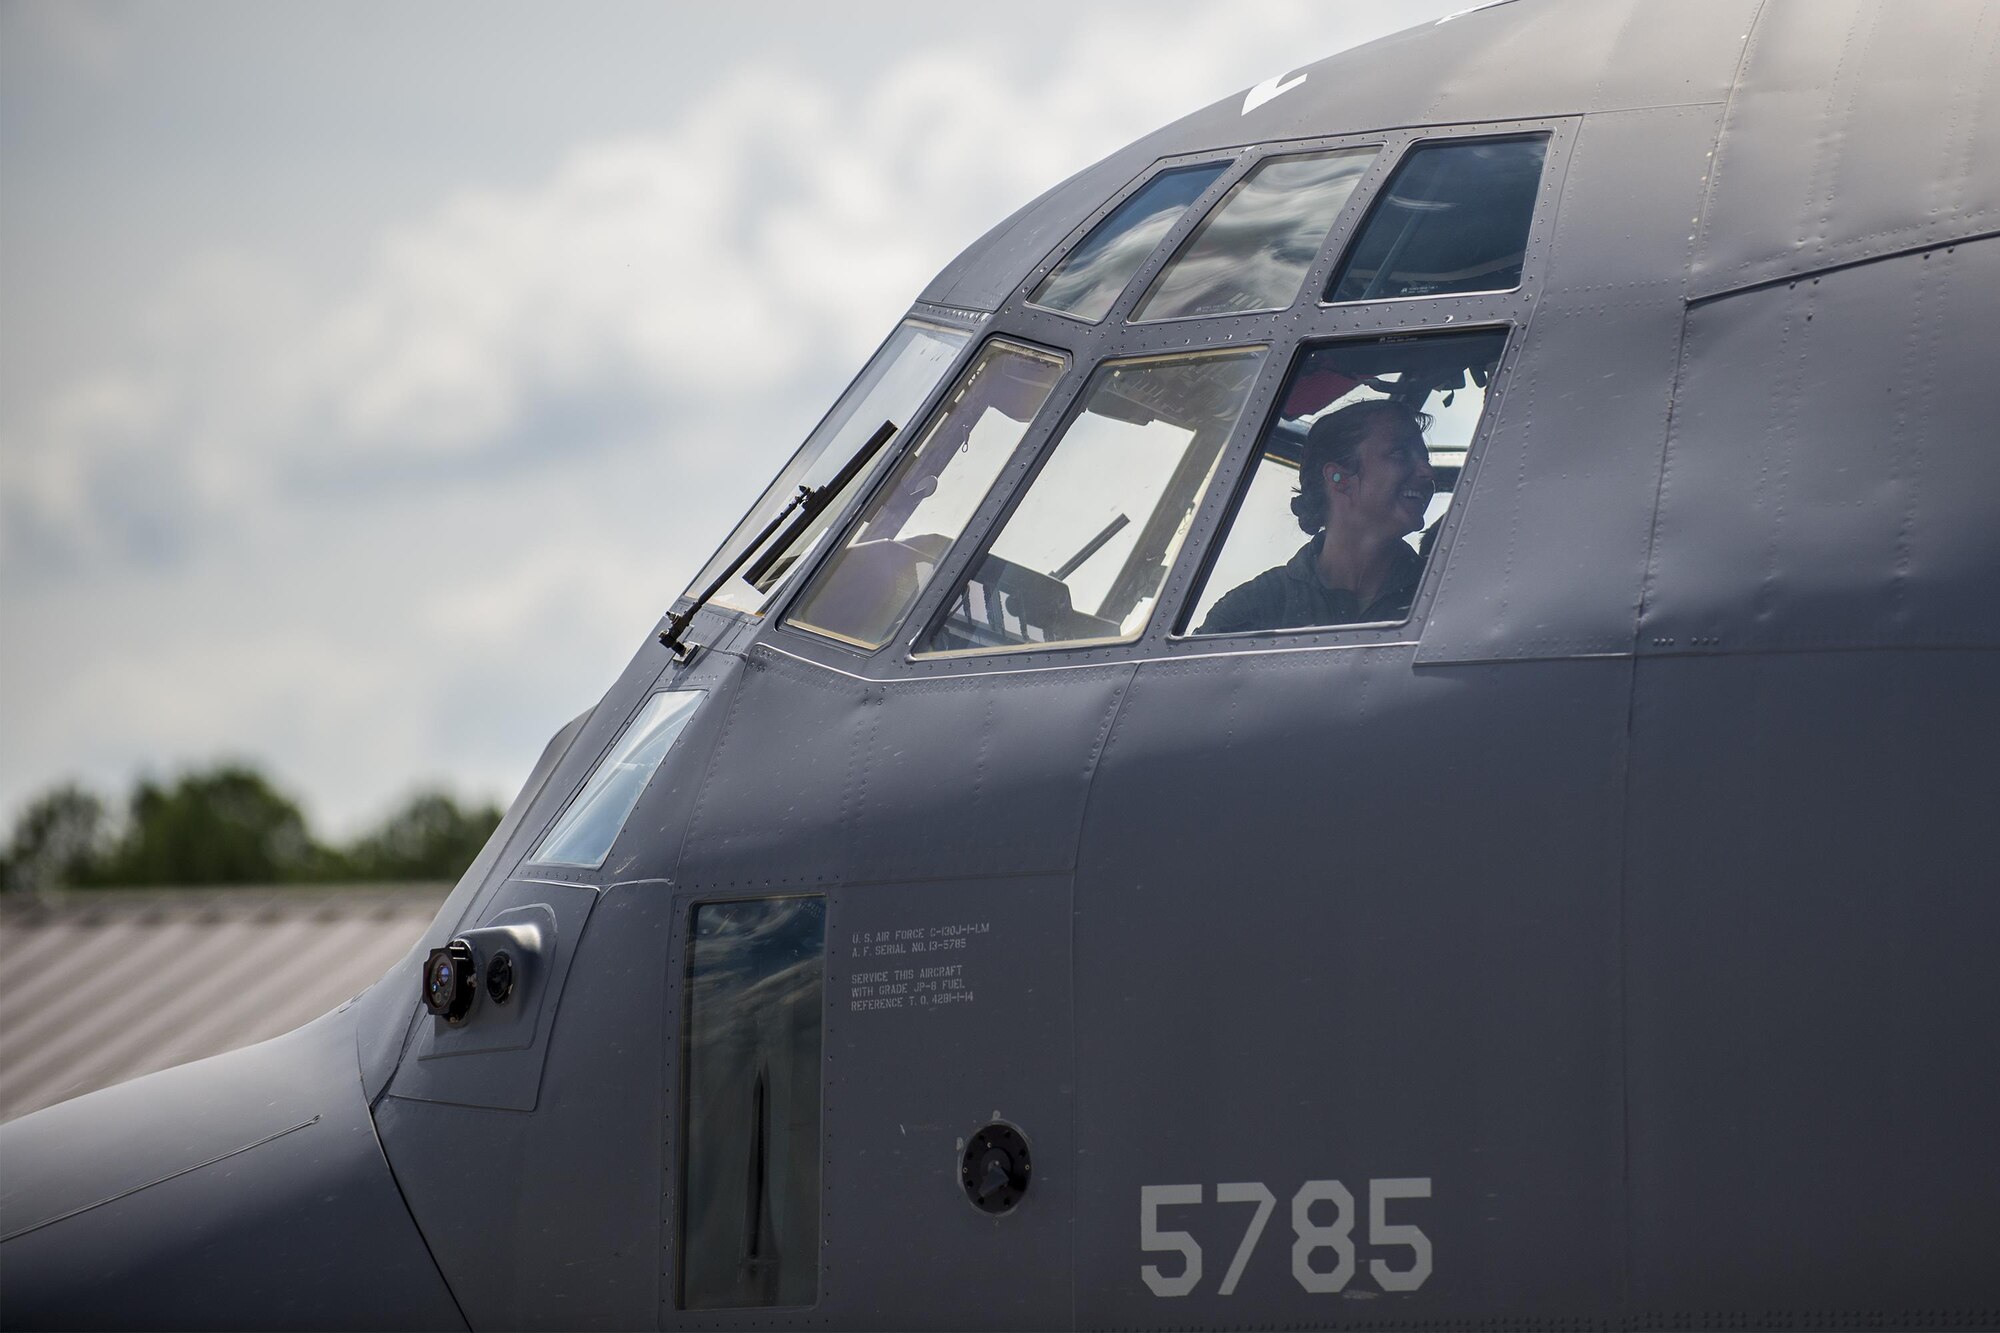 U.SU.S. Air Force Capt. Christy Wise,71st Rescue Squadron pilot, laughs in the cockpit of an HC-130J Combat King II after returning from her requalification flight, July 22, 2016, at Moody Air Force Base, Ga. Wise credited other amputees, who have become her mentors, for her quick return to the sky. (U.S. Air Force photo by Airman Daniel Snider)